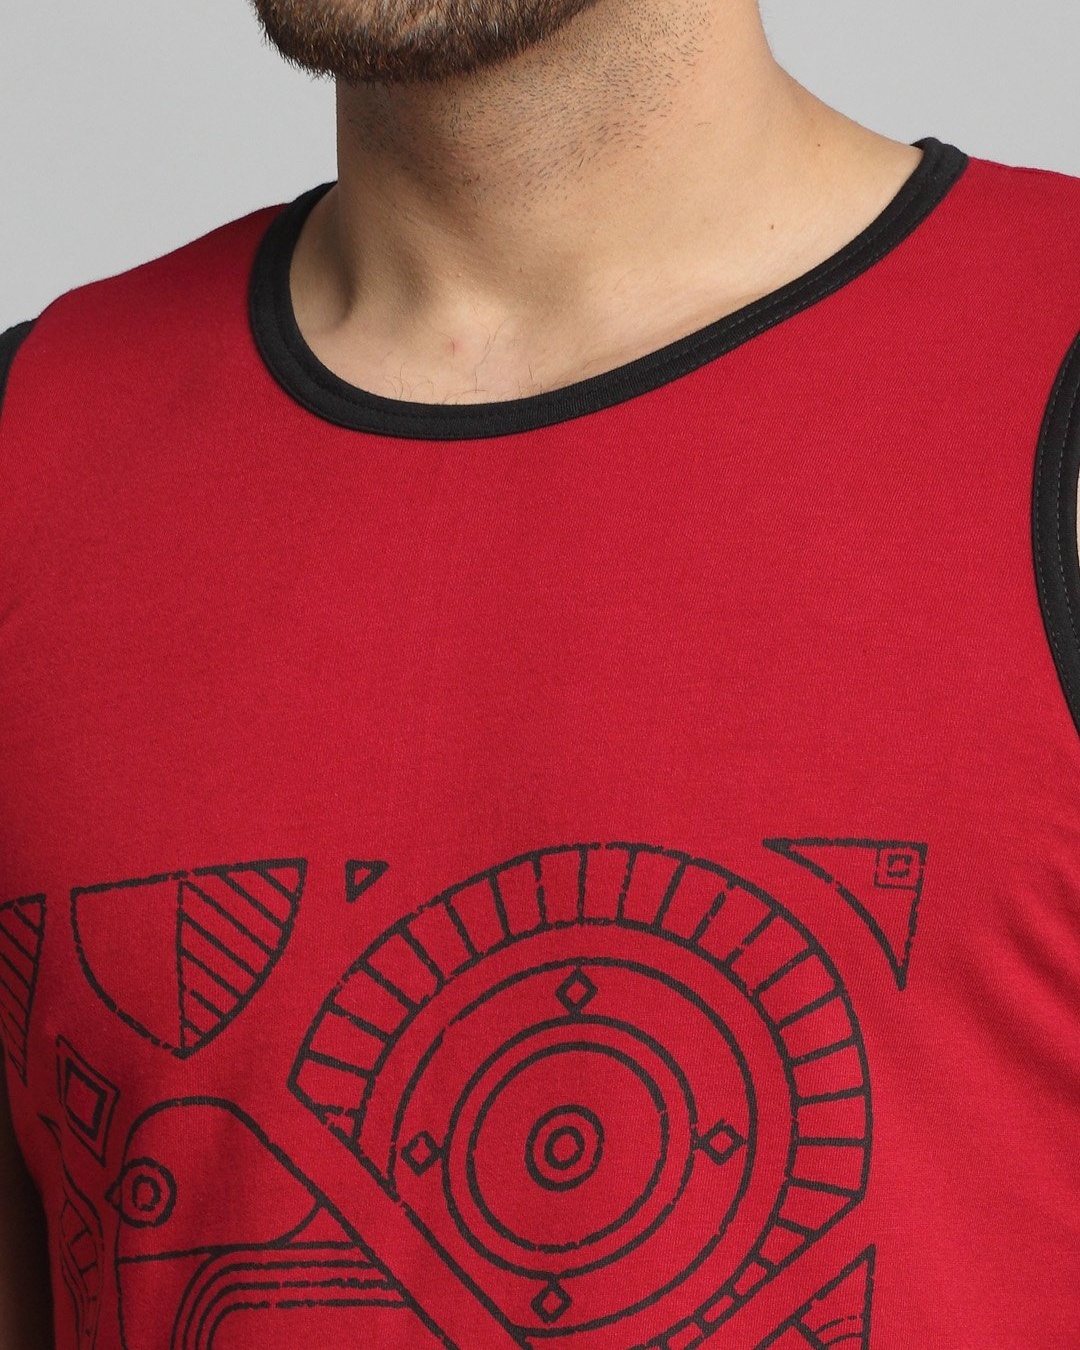 Shop Men's Red Graphic Printed T-shirt